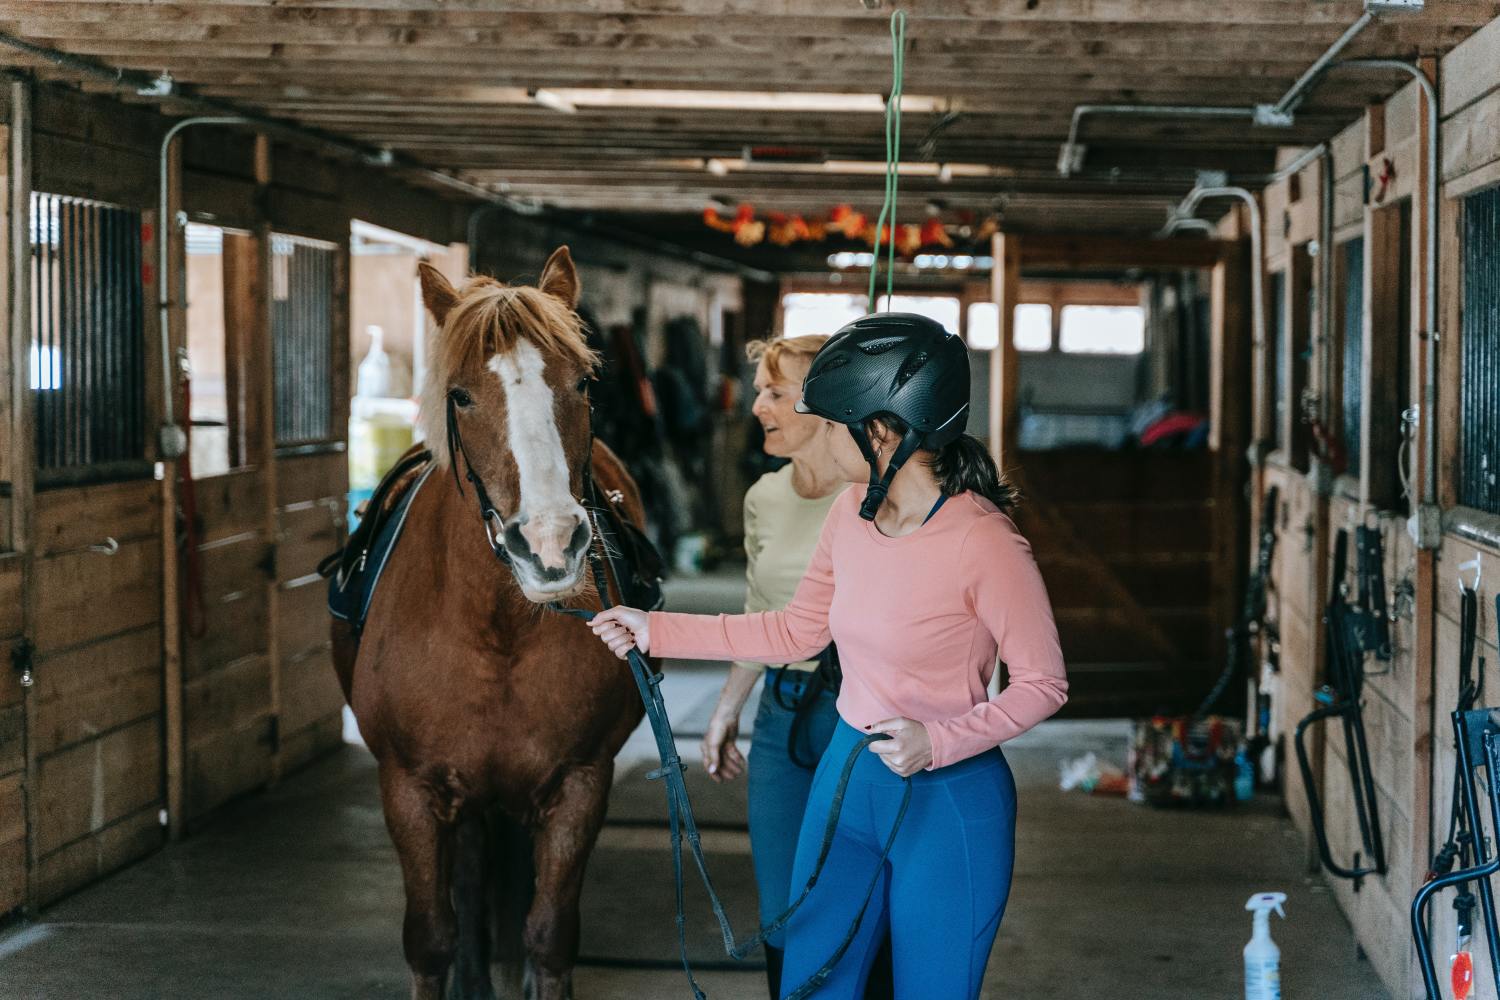 Woman enjoying horse riding hobby after learning who can petition for probate of Will in California.